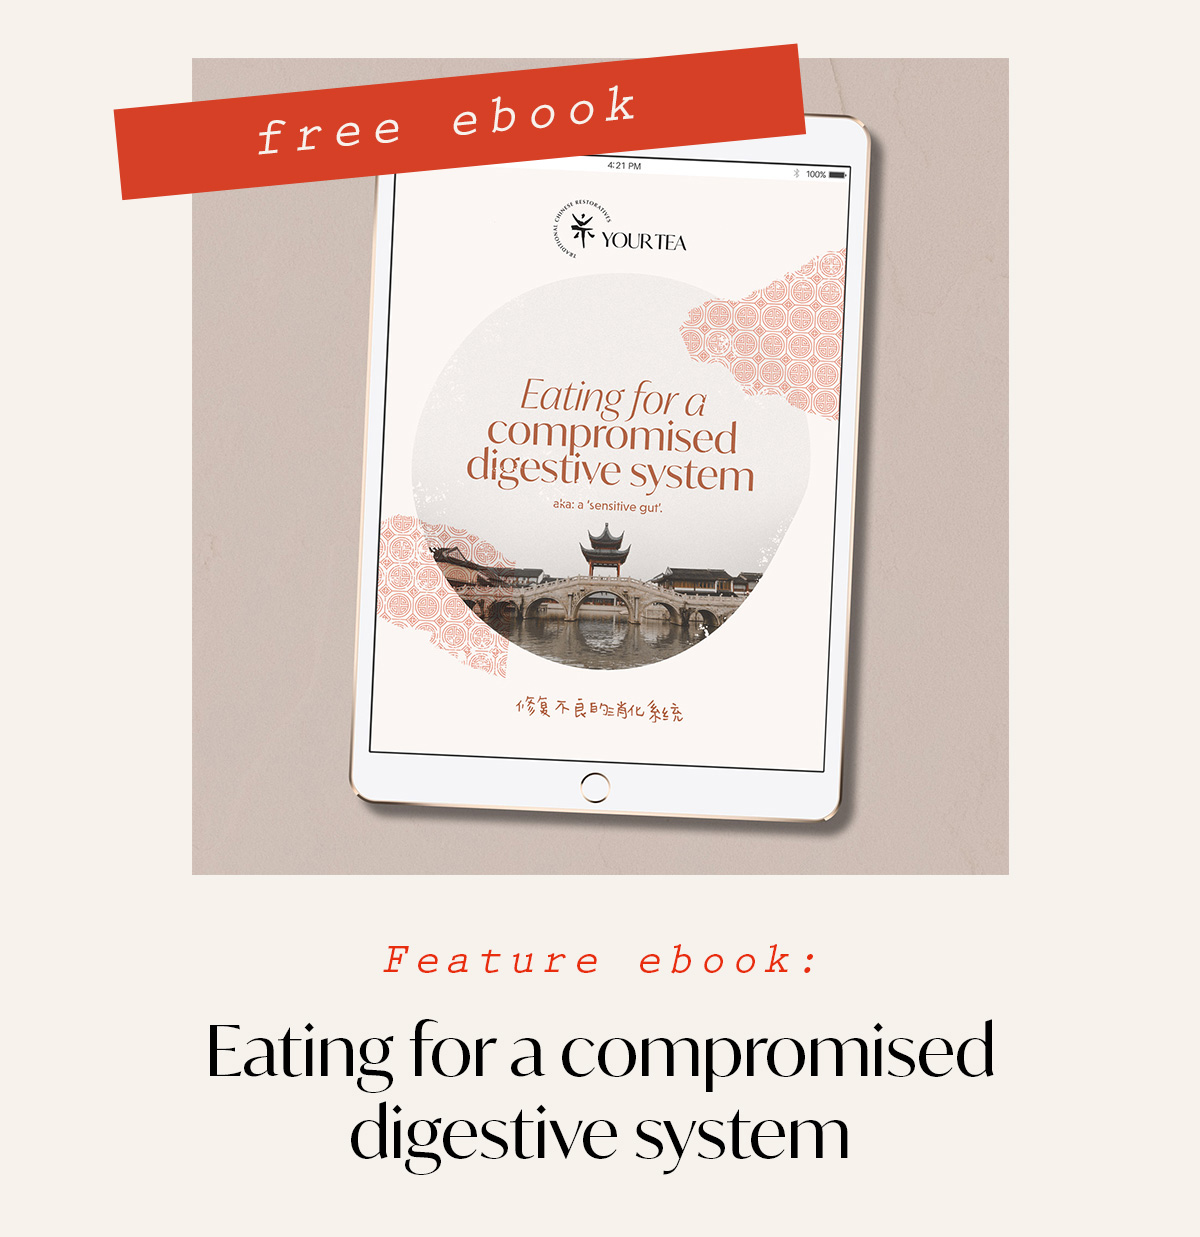 'Eating for a compromised digestive system'.